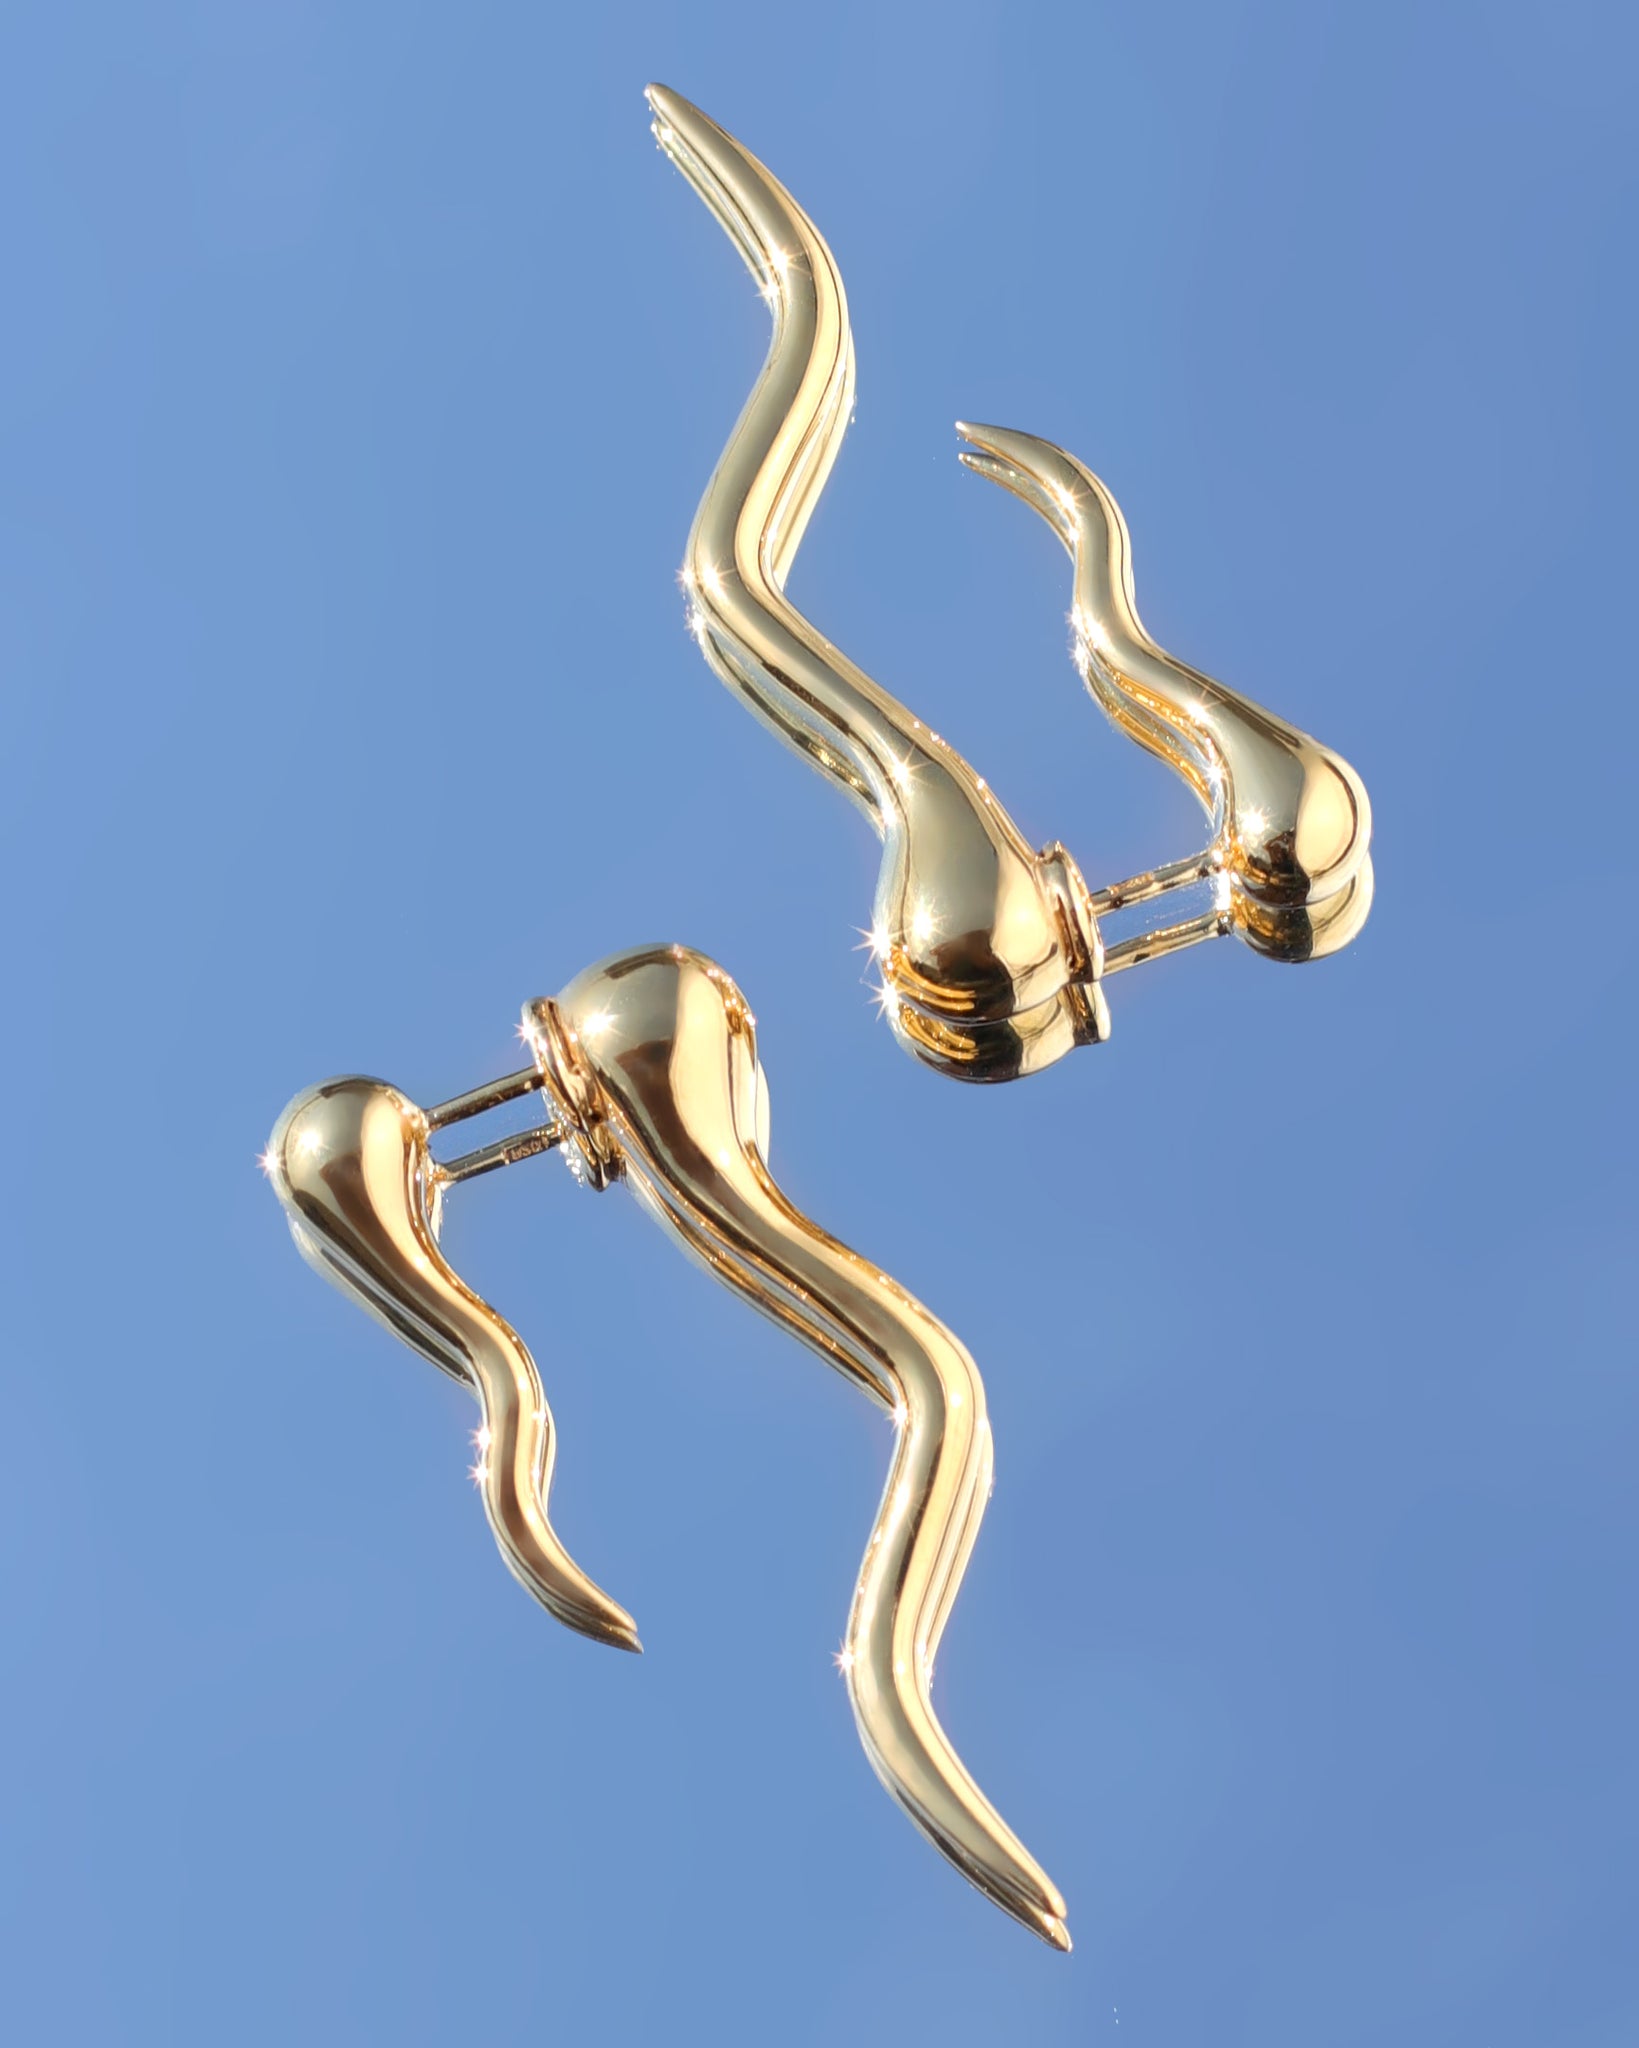 SMOOTH SPORE PUSHBACK EARRING